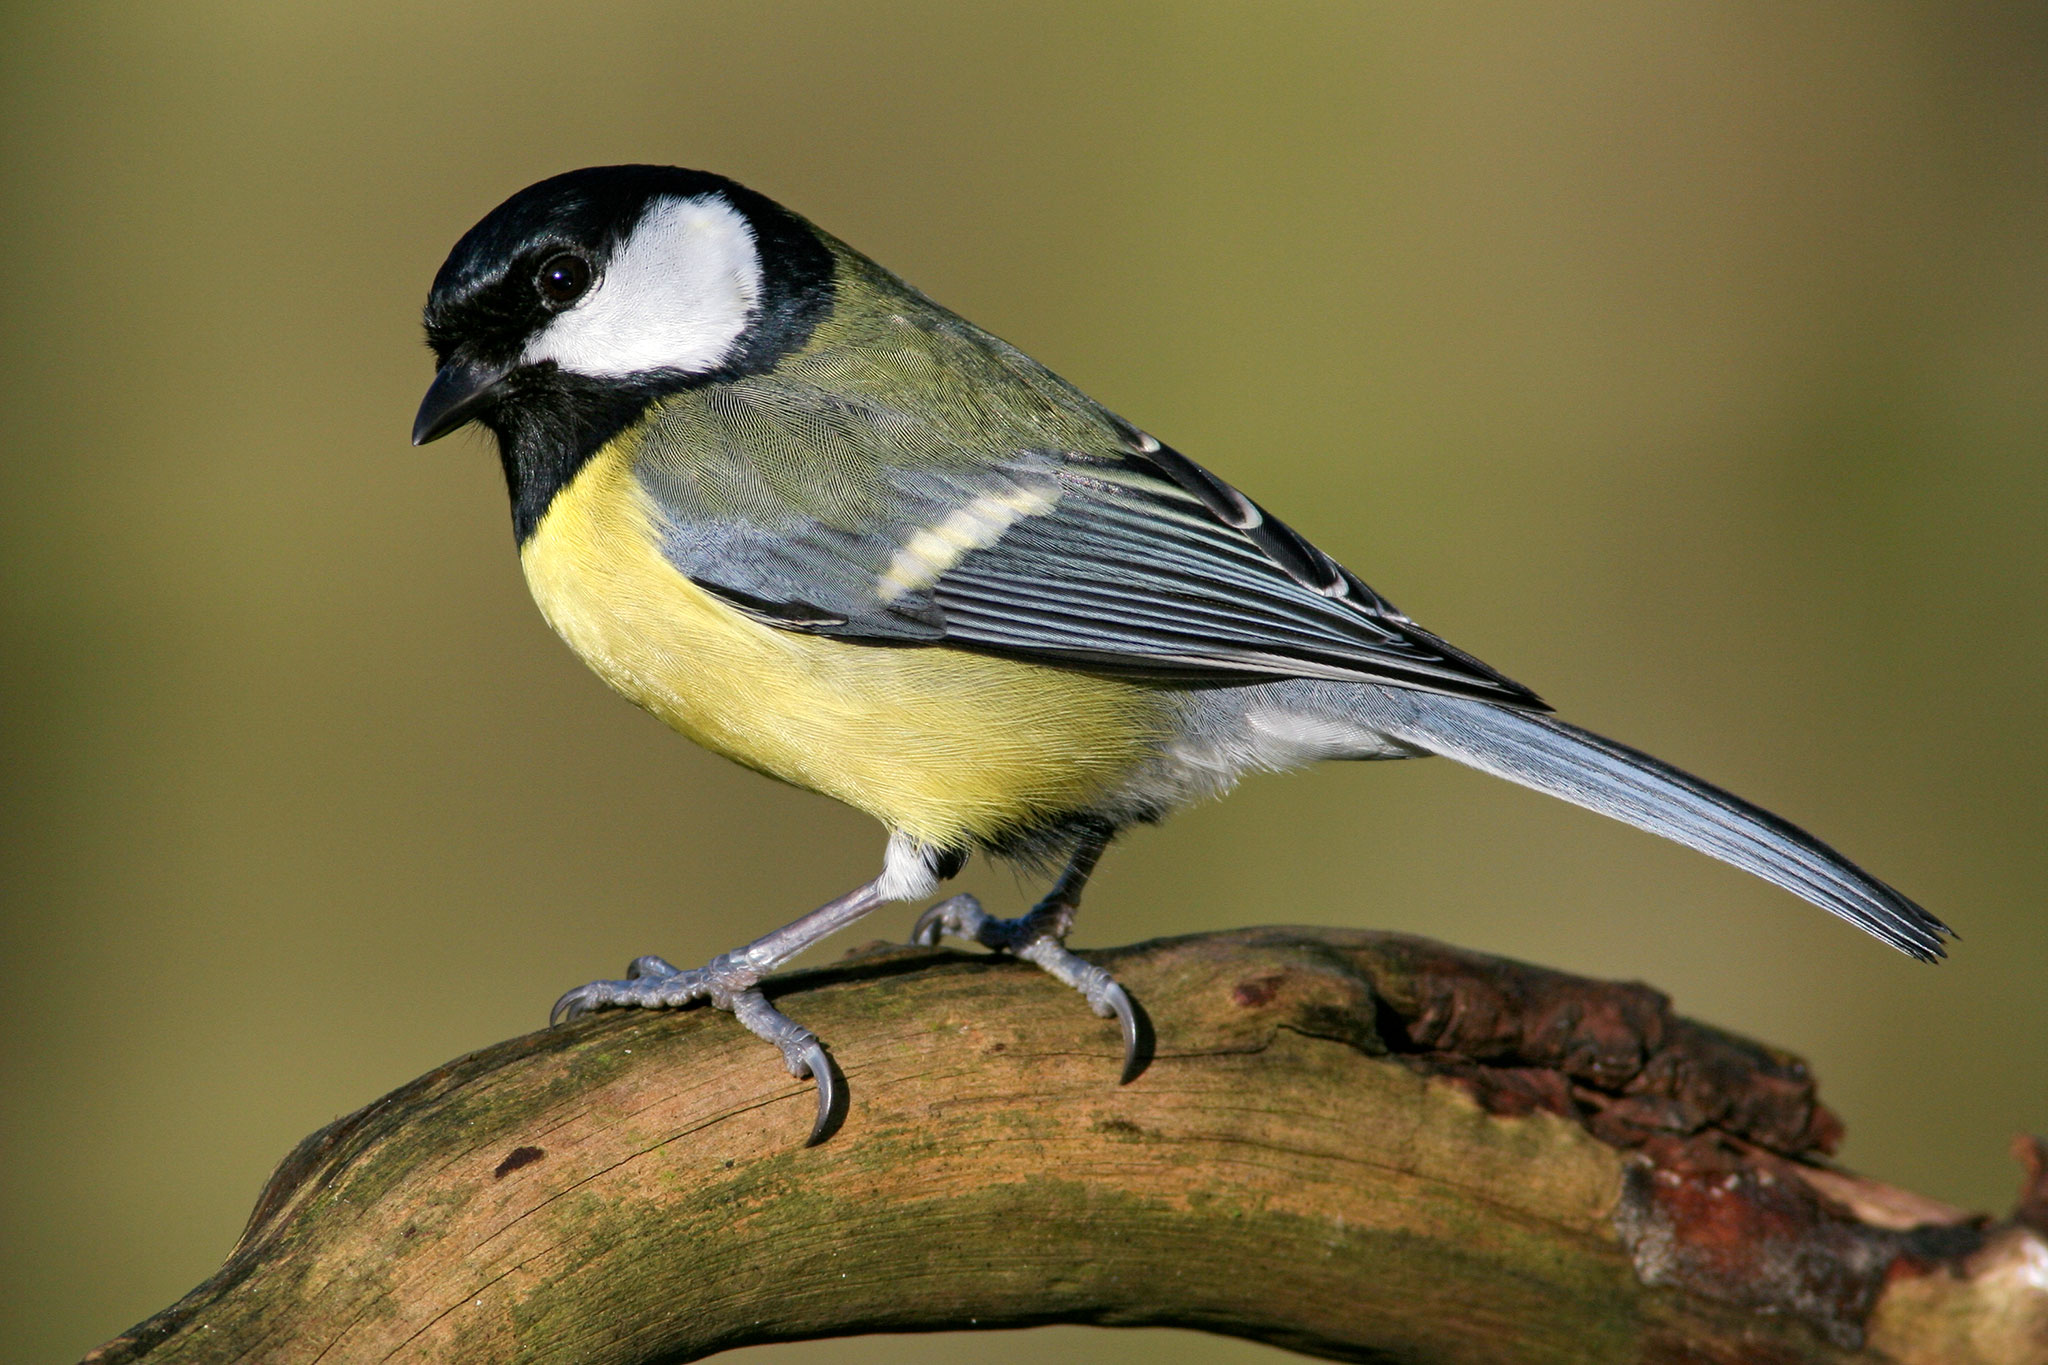 Great Tits May Be Evolving Bigger Beaks. Here's Why.